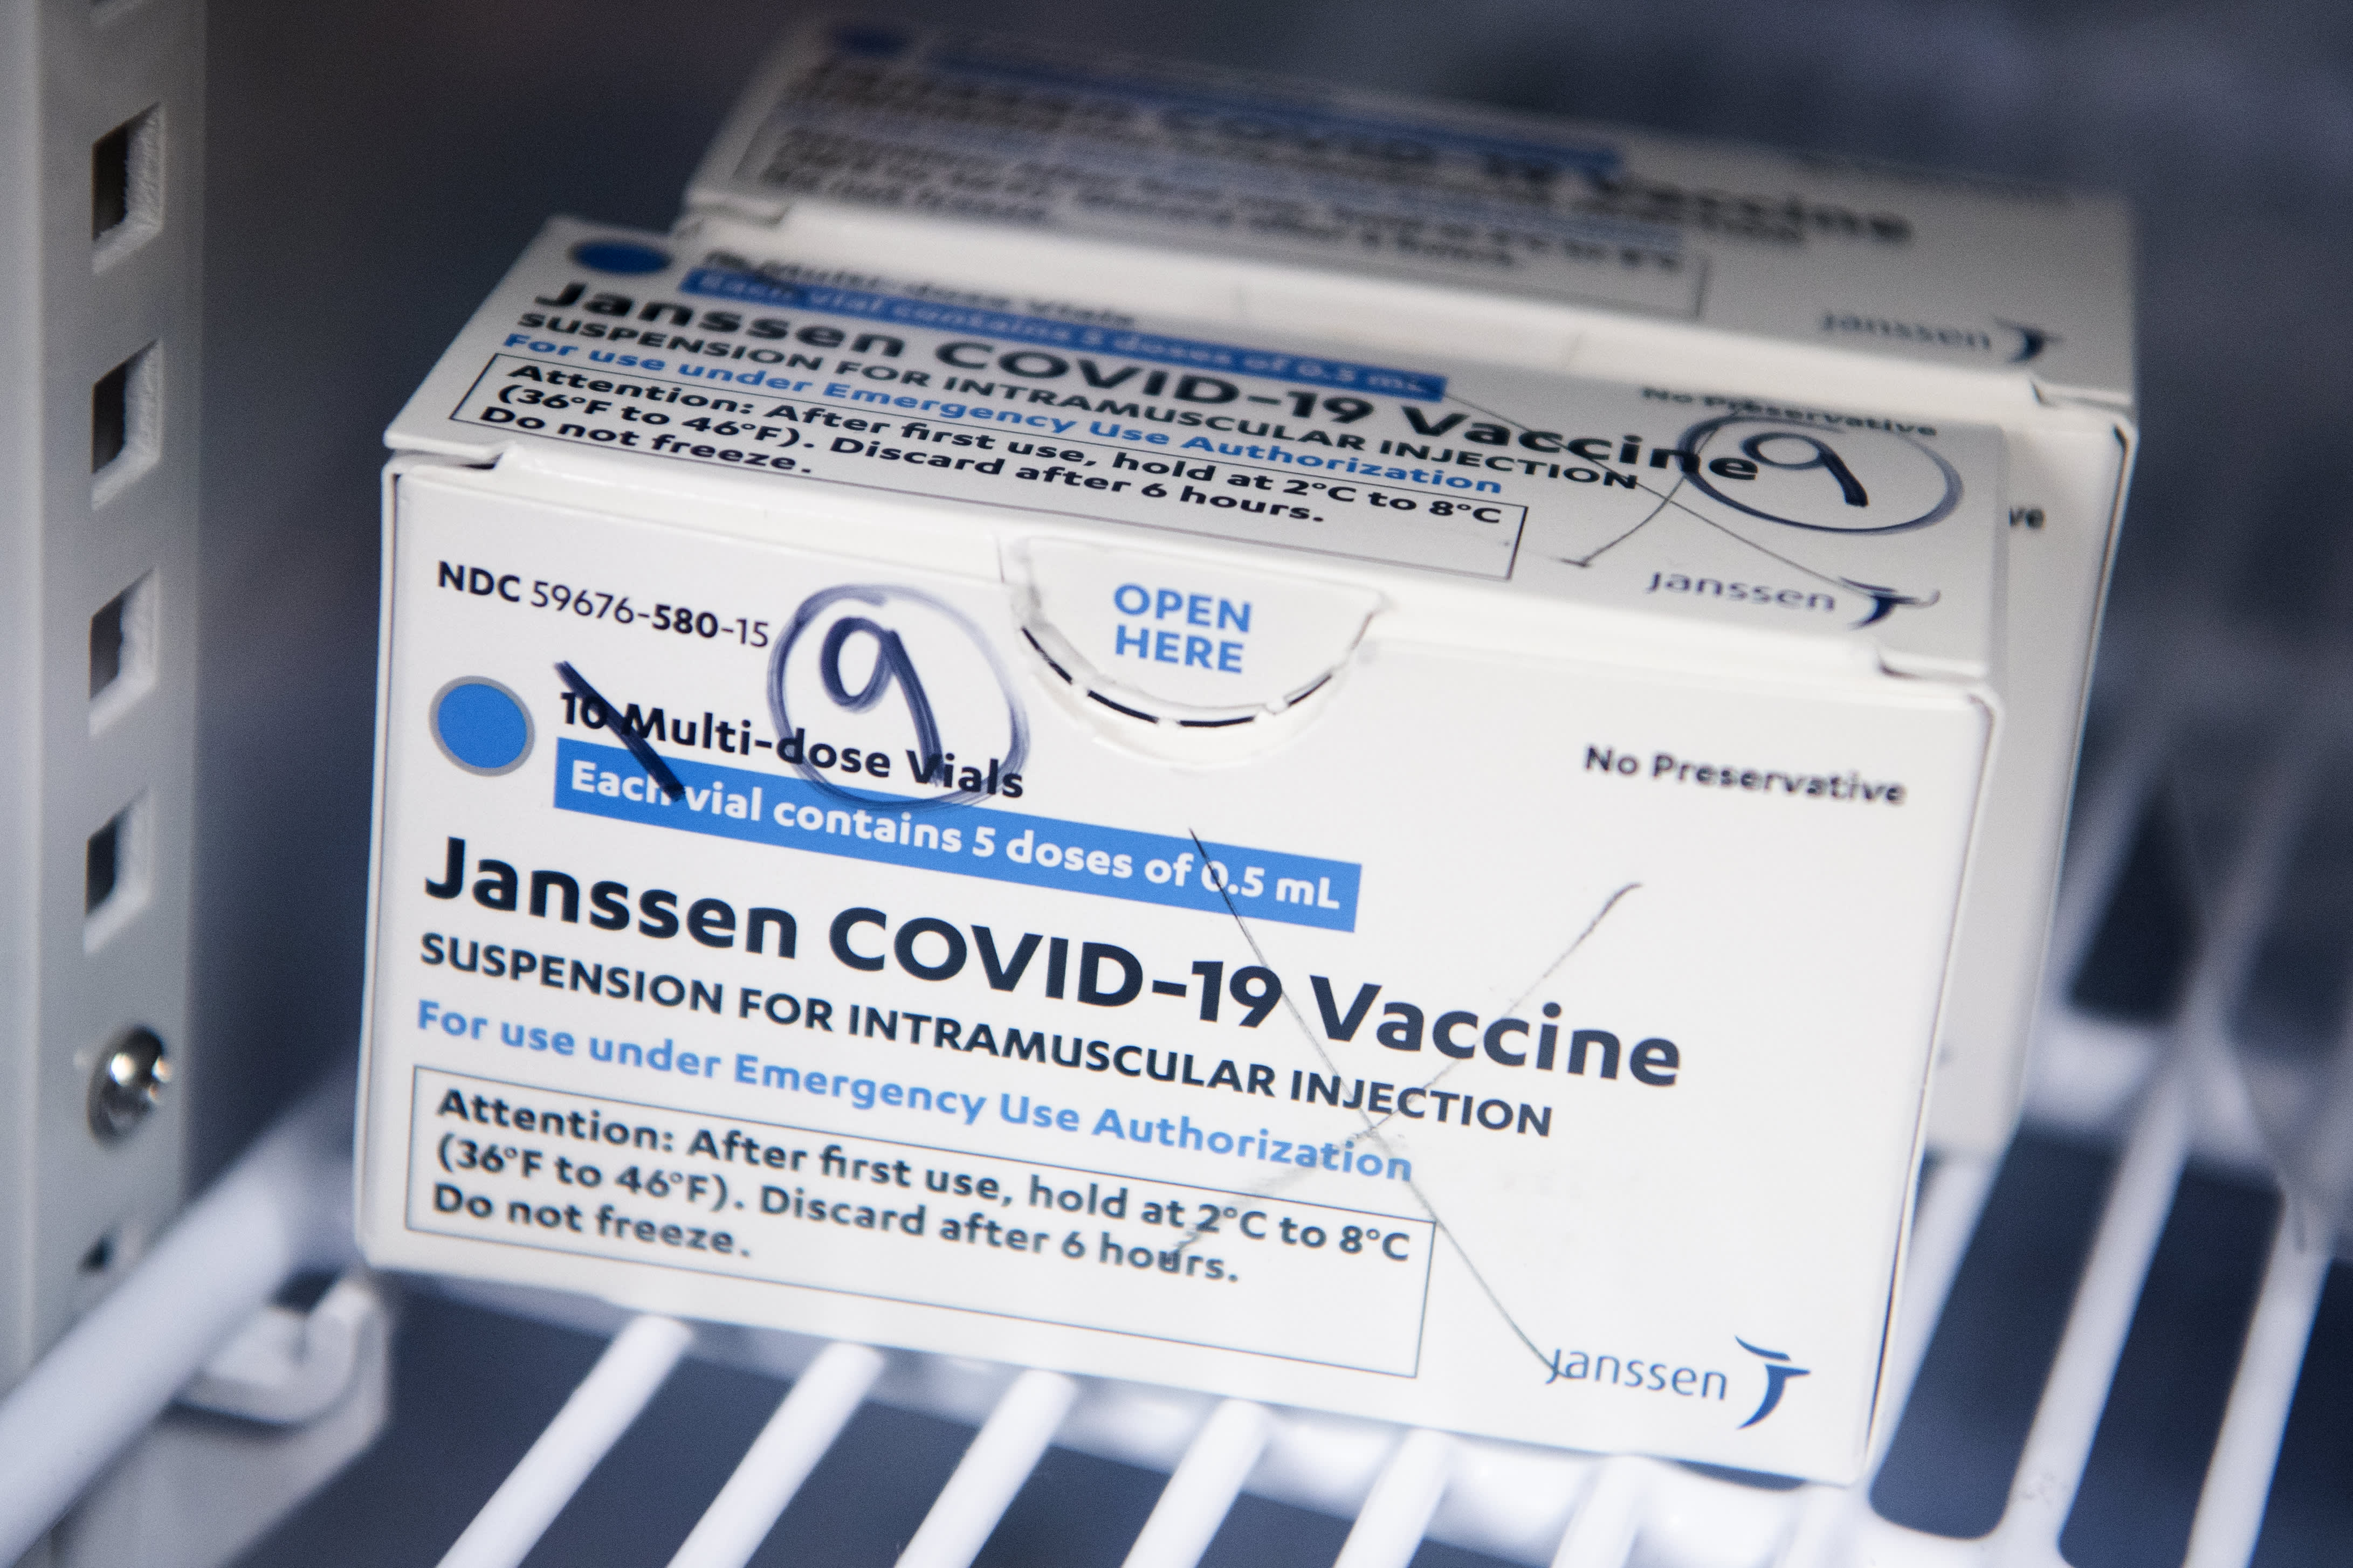 The use of the interrupted J&J Covid vaccine has no effect on the timeline for US vaccination, says doctor